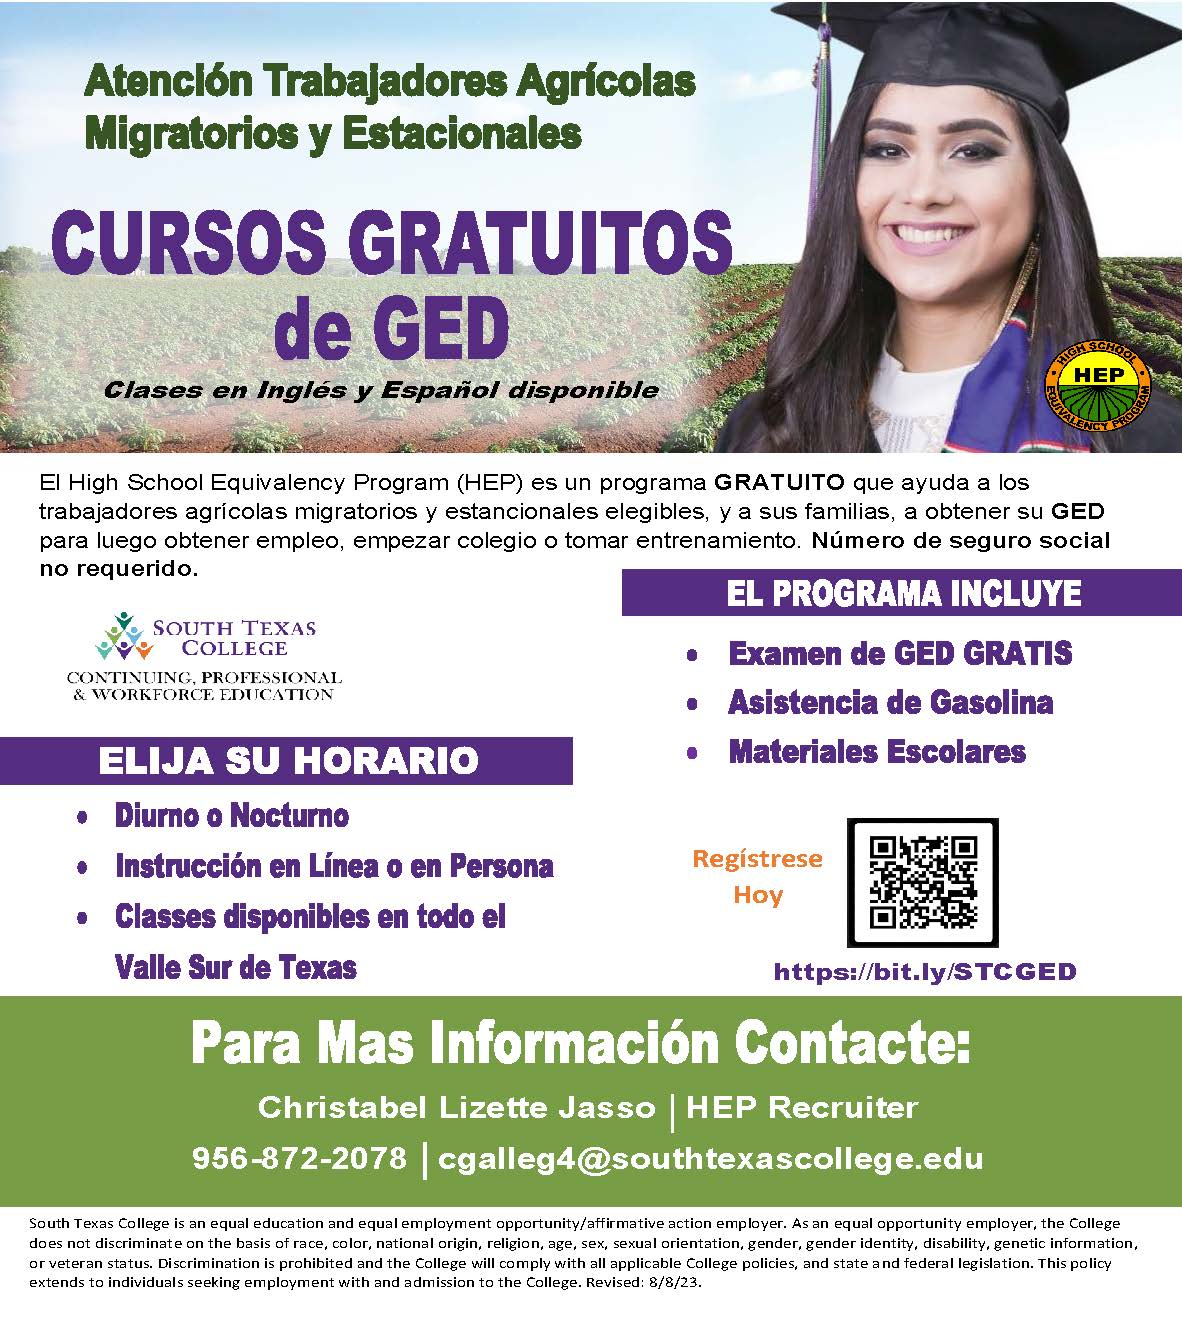 ged courses